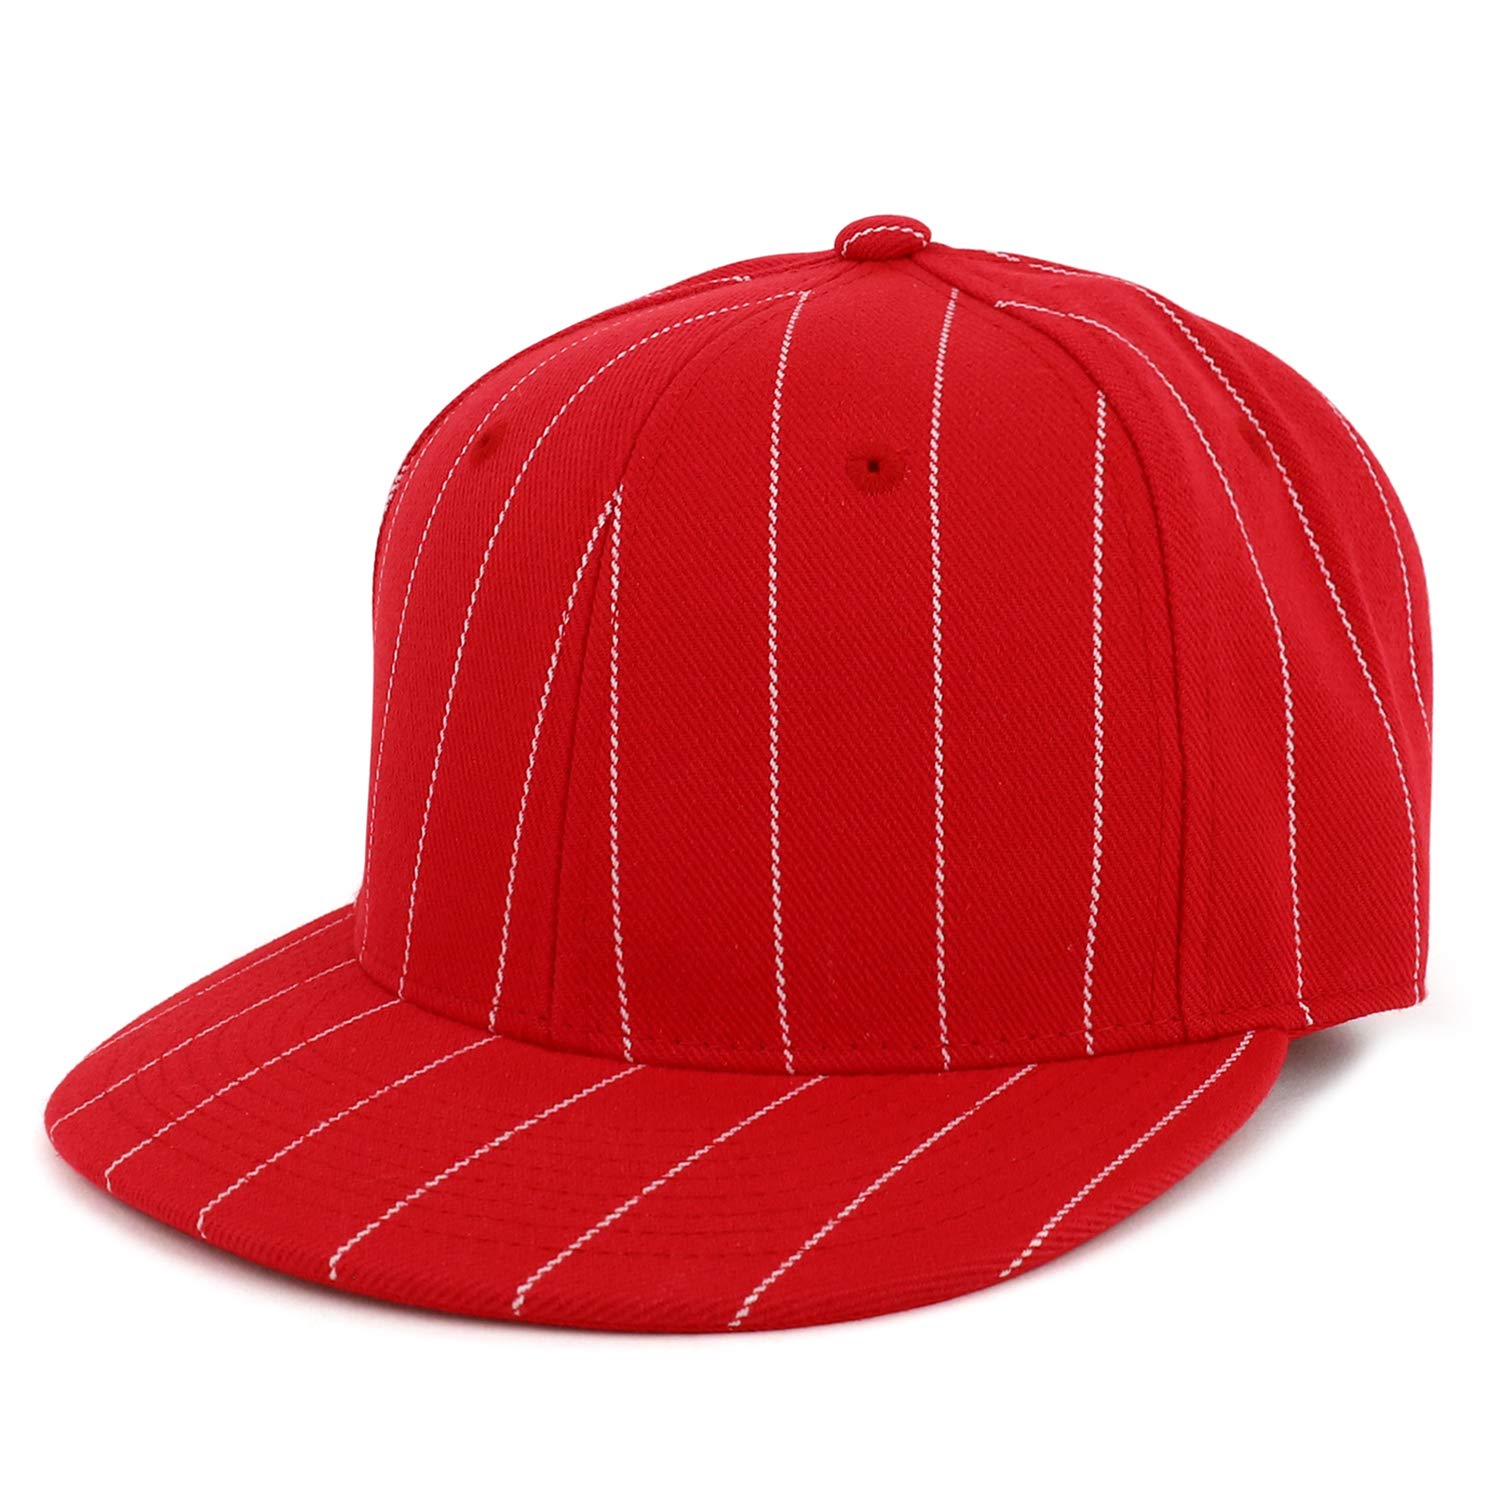 Armycrew Pin Striped Structured Flatbill Fitted Baseball Cap - Red - 7 1/4